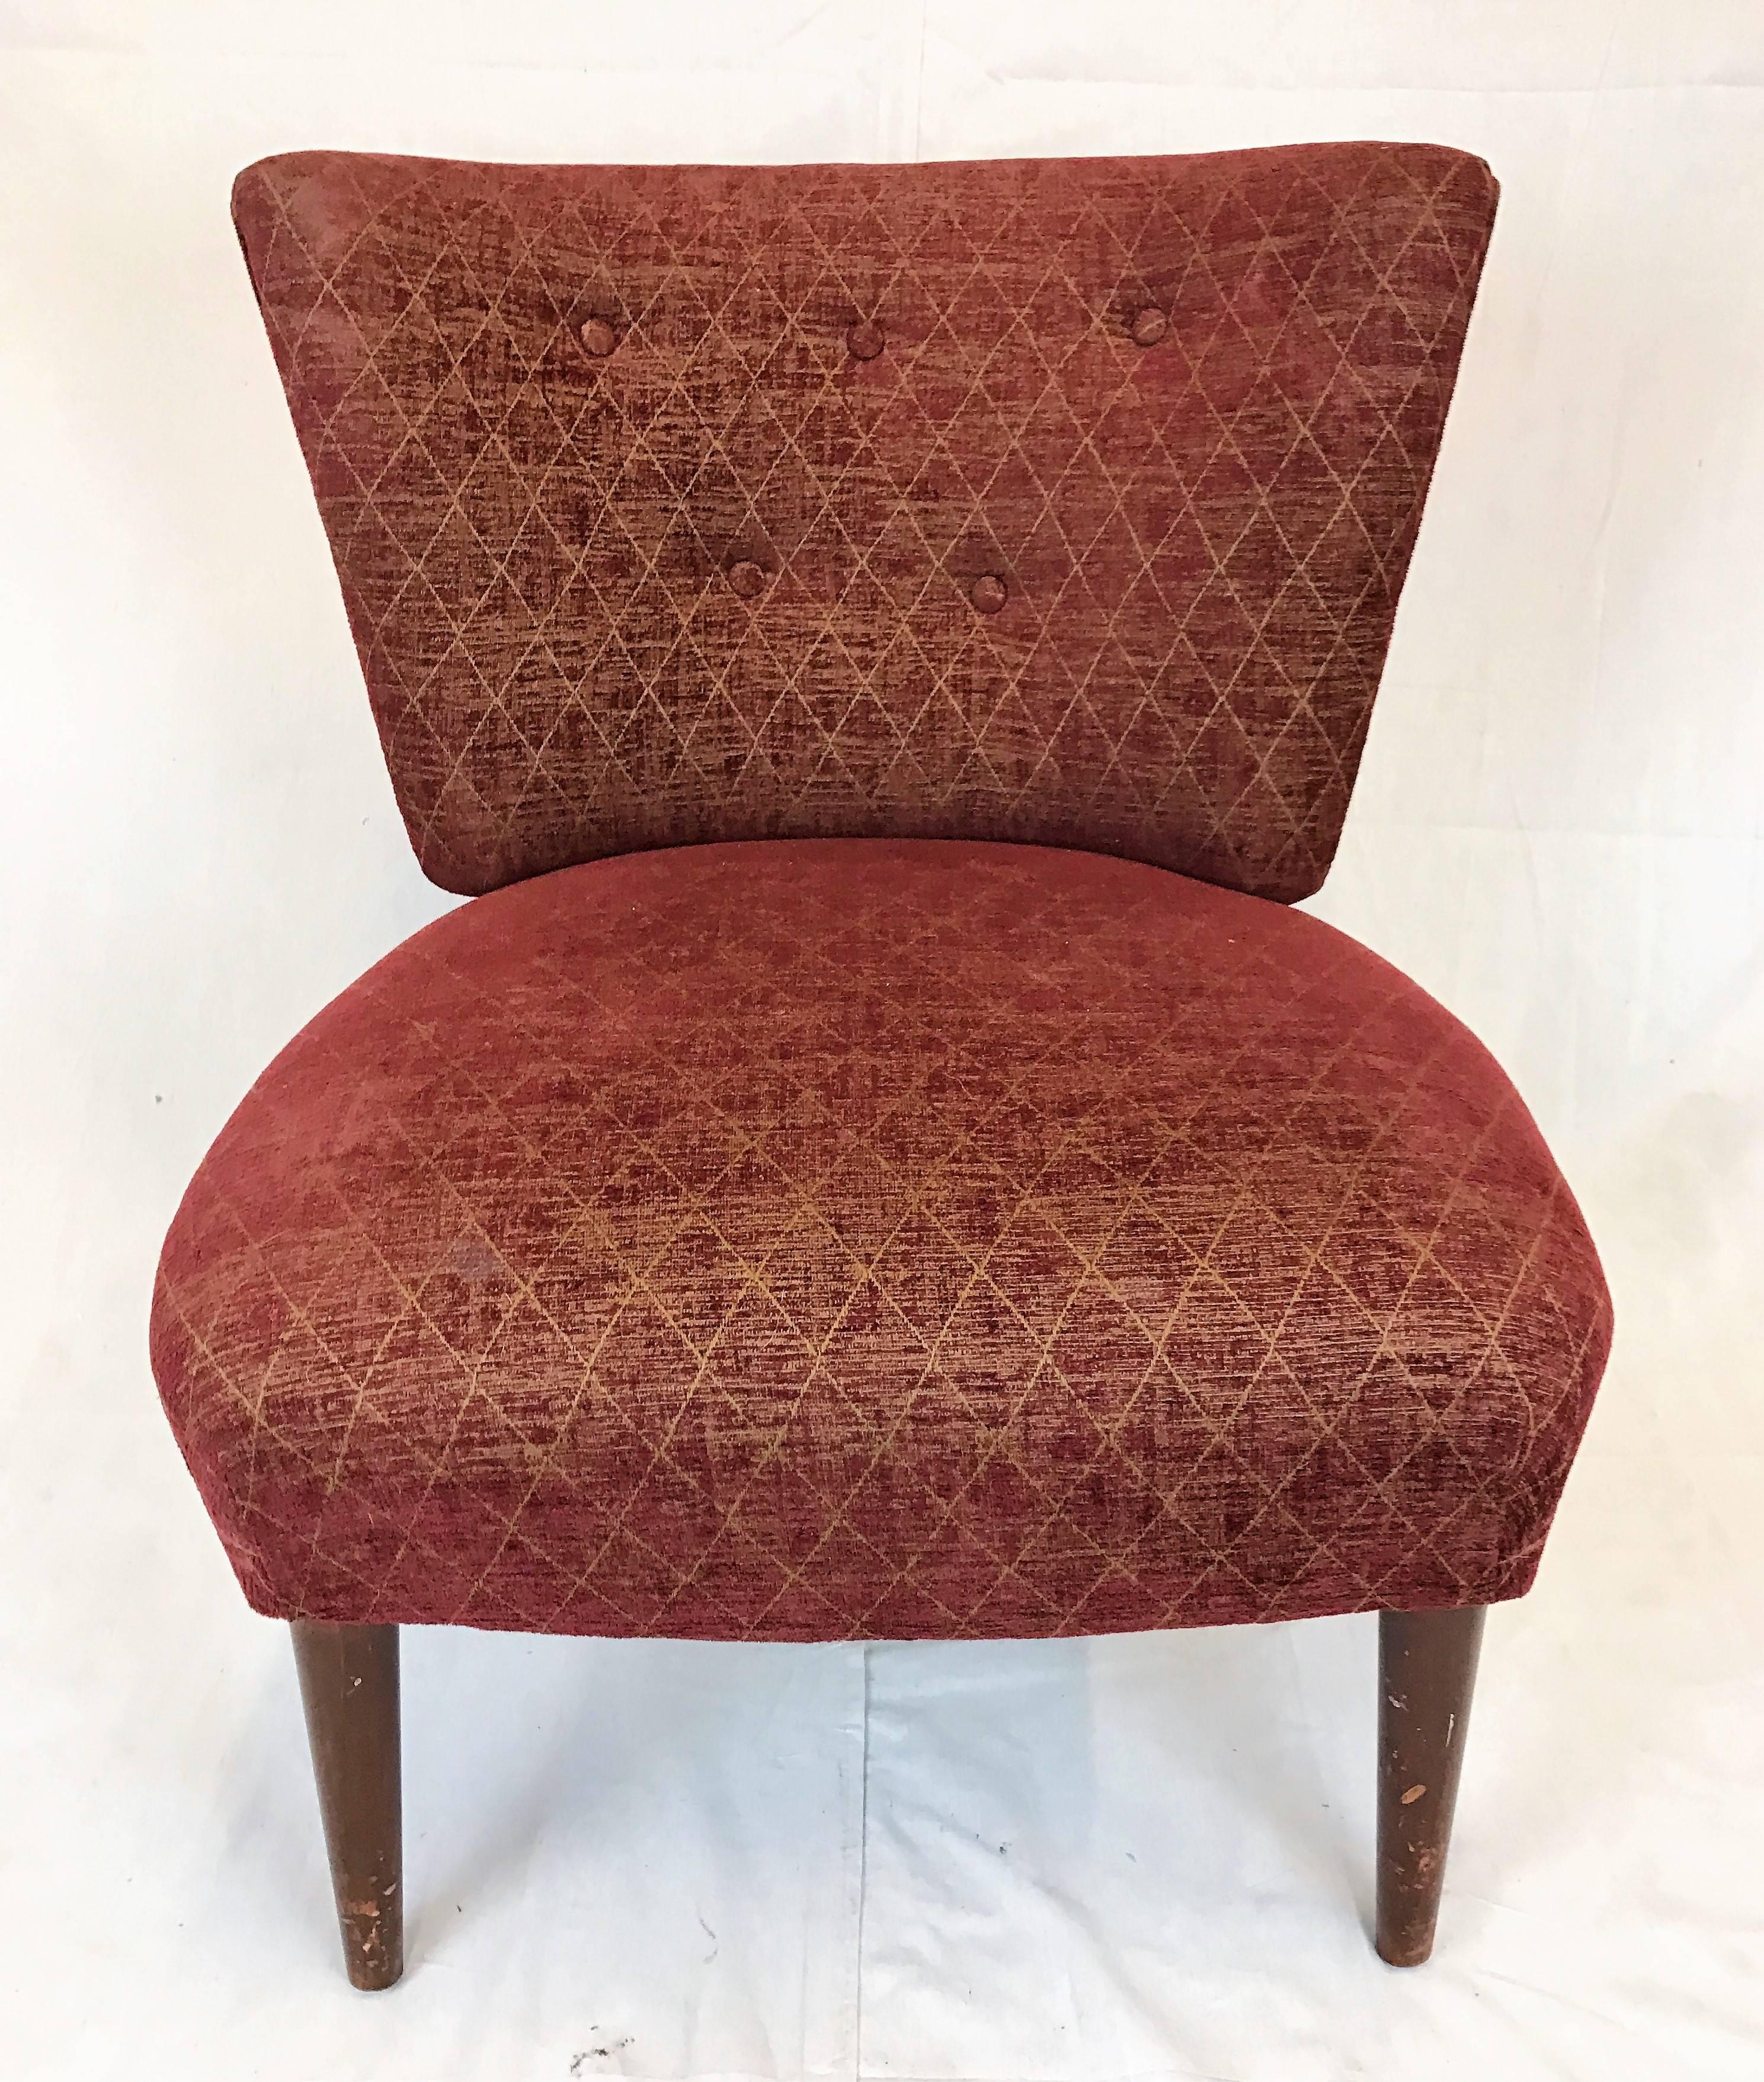 Elegant pair of slipper chairs attributed to Gilbert Rohde (1894-1944), for Kroehler Manufacturing early 1940s. The full “pouf” seat found on Rohde’s designs sits atop tapered walnut legs. Buttoned backrest and piping add to the chairs glamour.